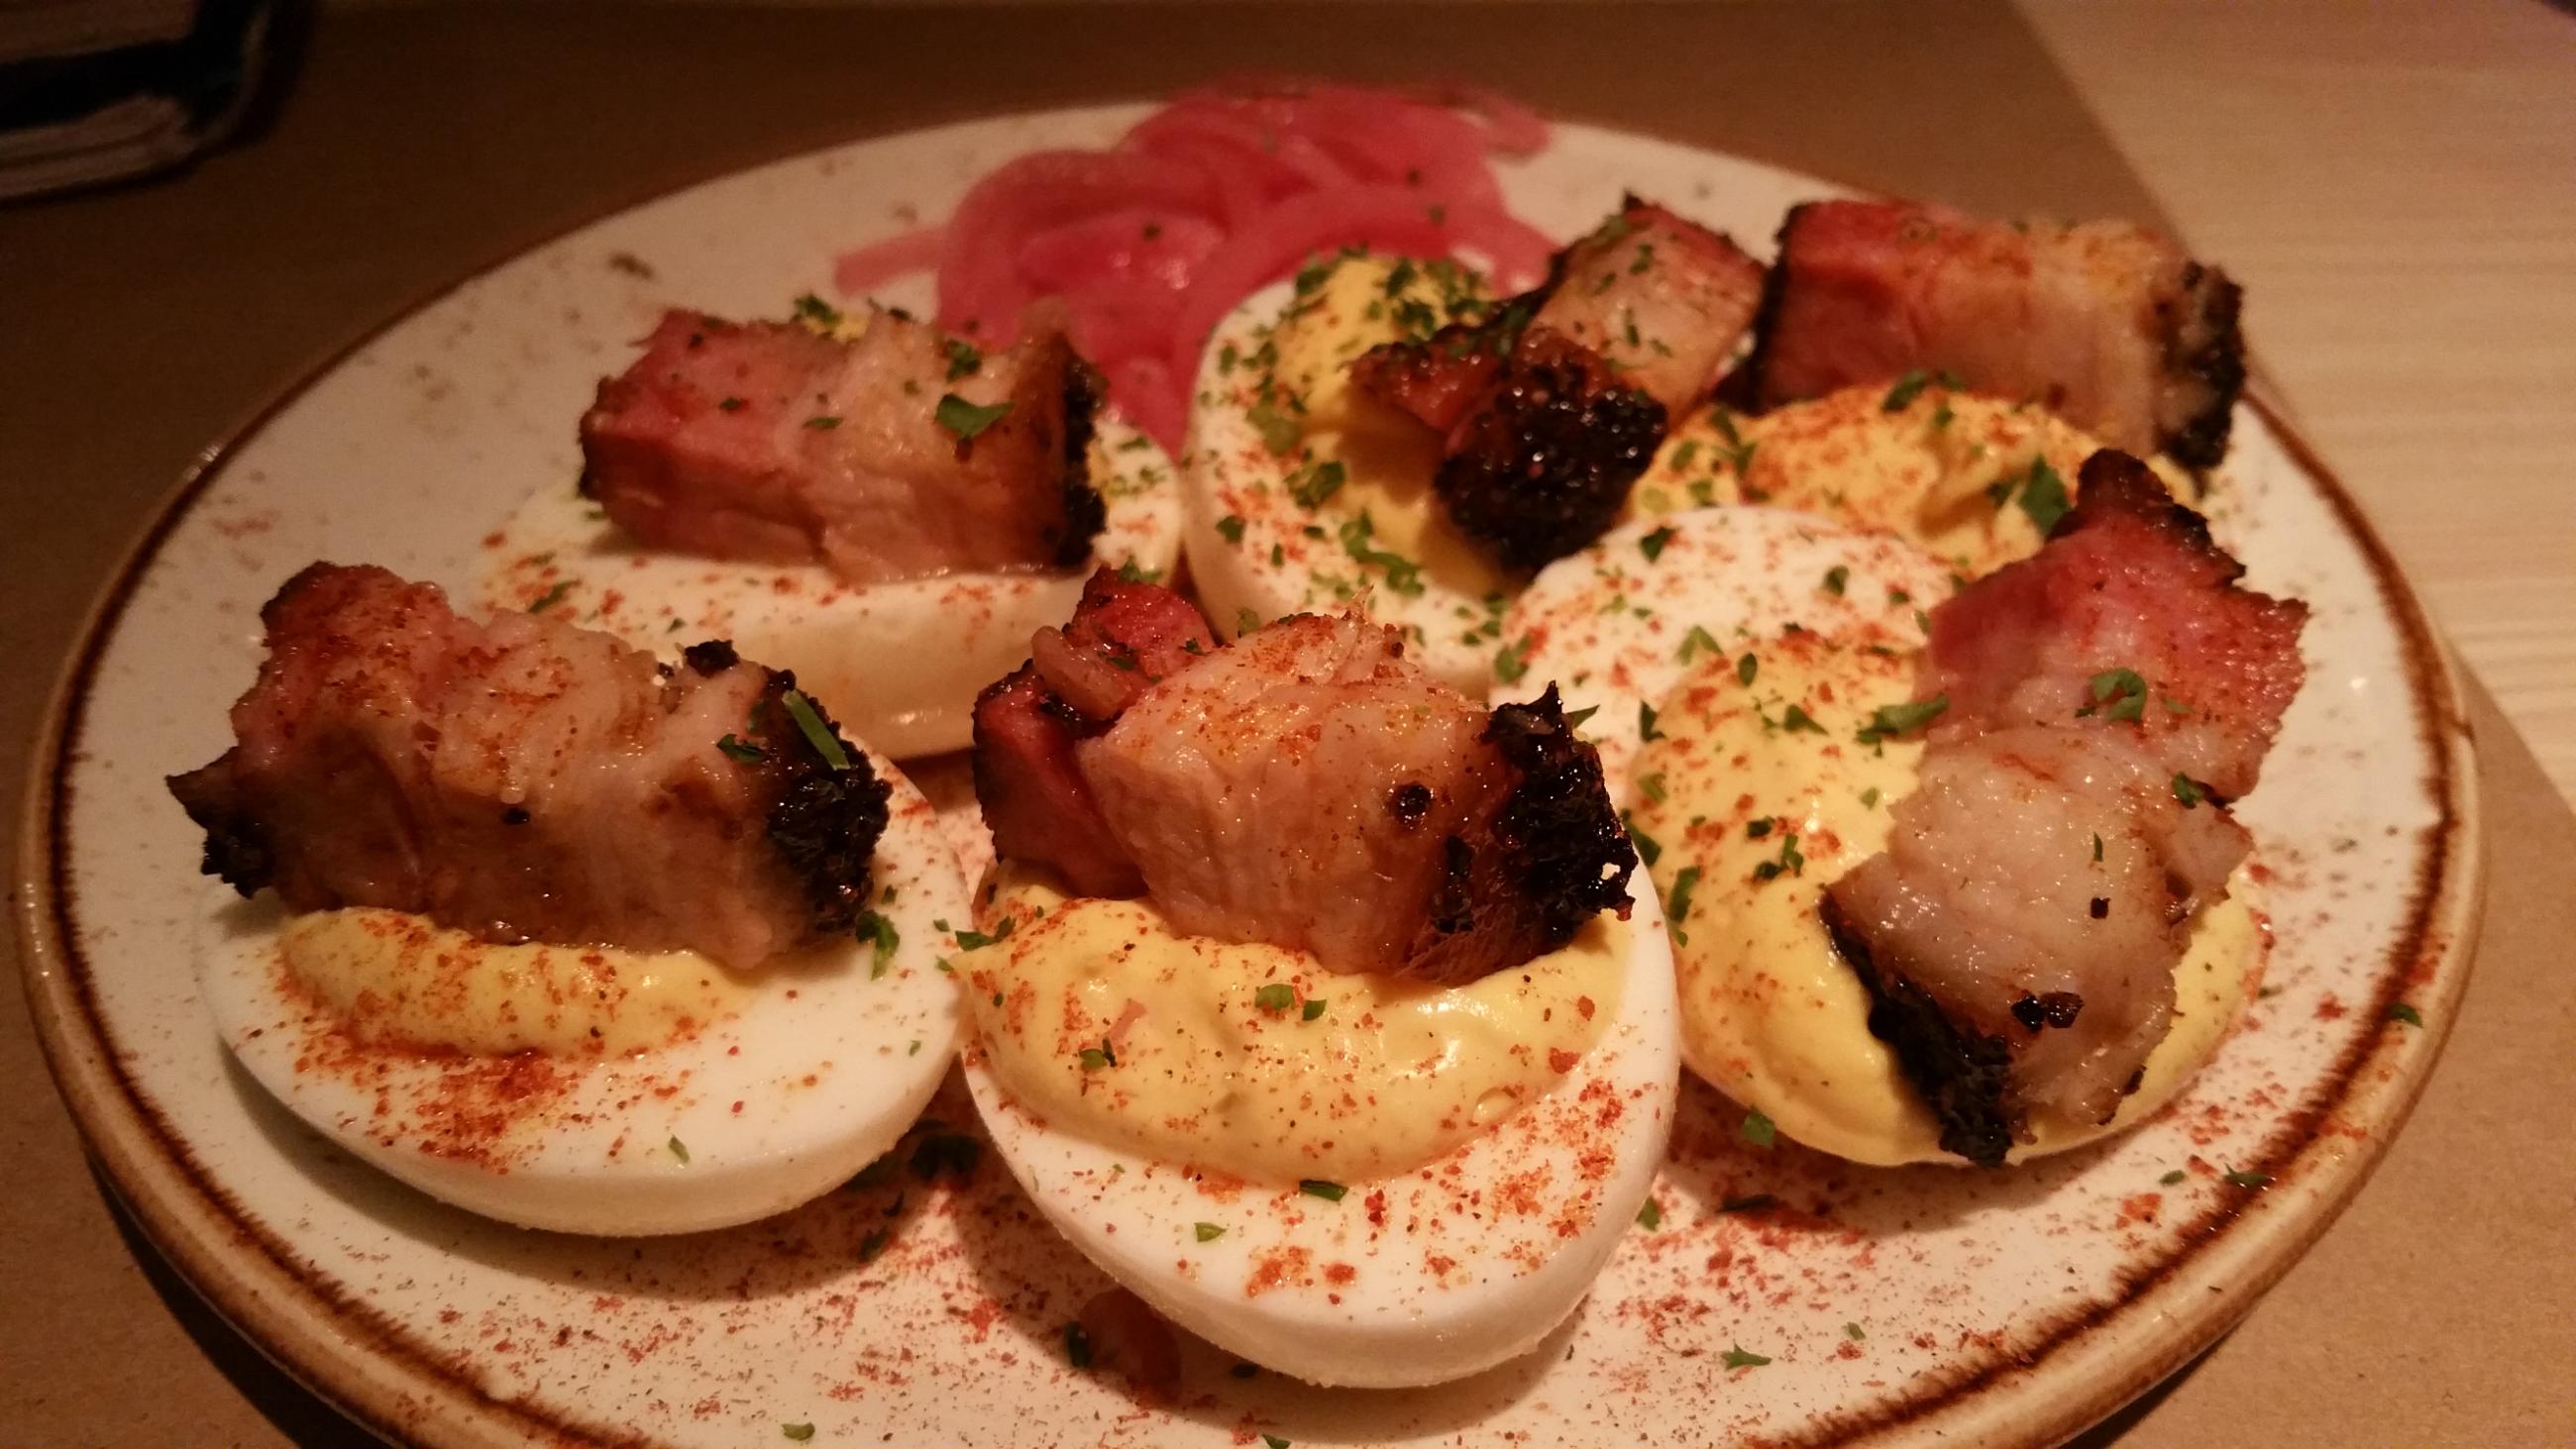 Sunday's deviled egg appetizer topped with pork belly chunks. Photo by The Signal reporter Bianca Salazar.